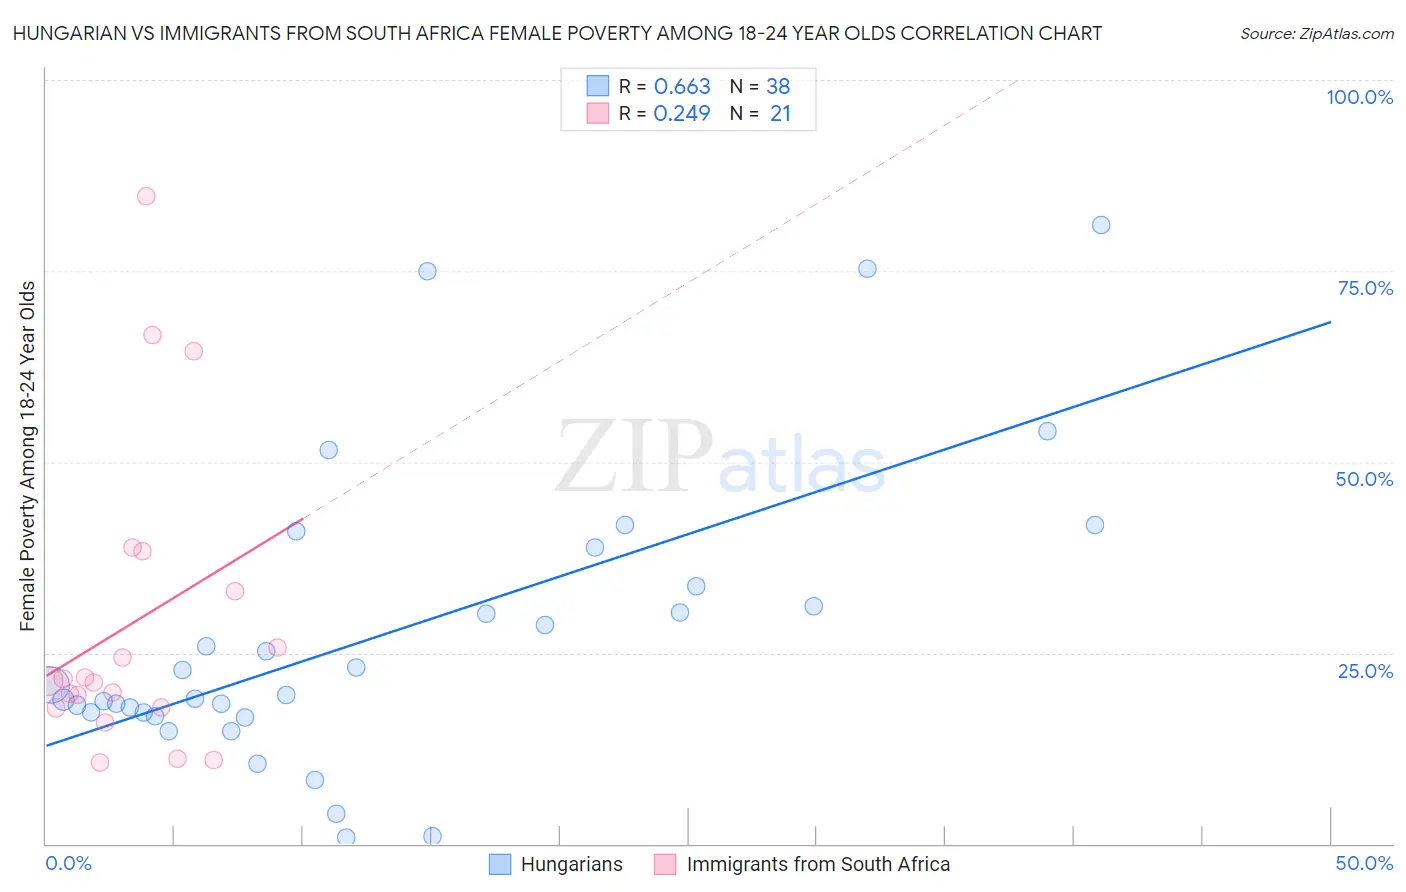 Hungarian vs Immigrants from South Africa Female Poverty Among 18-24 Year Olds